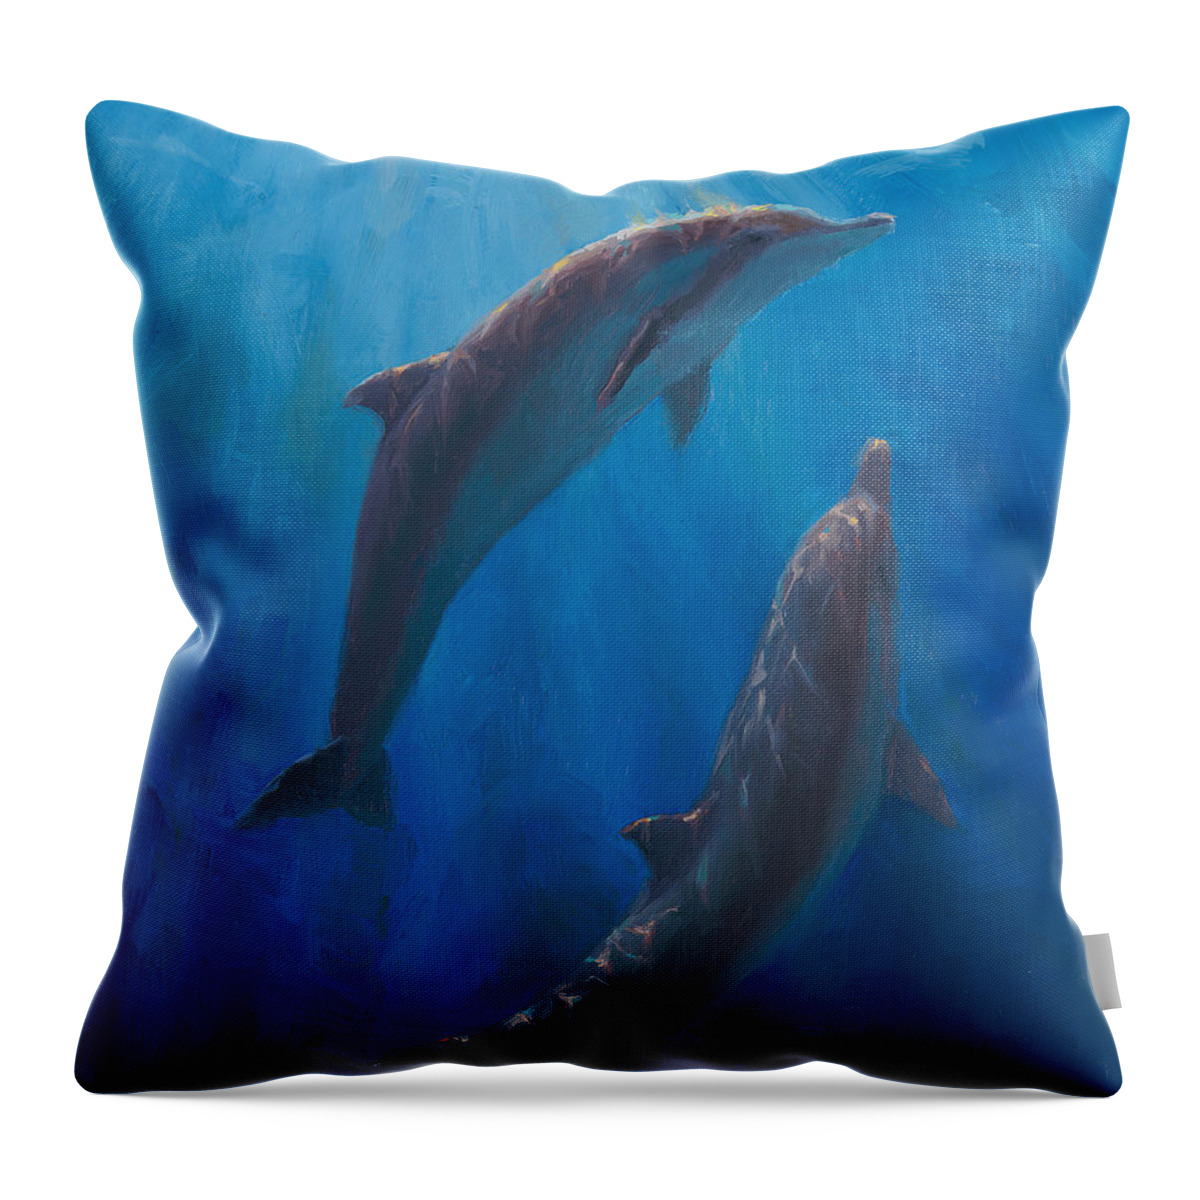 Coastal Decor Throw Pillow featuring the painting Dolphin Dance - Underwater Whales - Ocean Art - Coastal Decor by K Whitworth